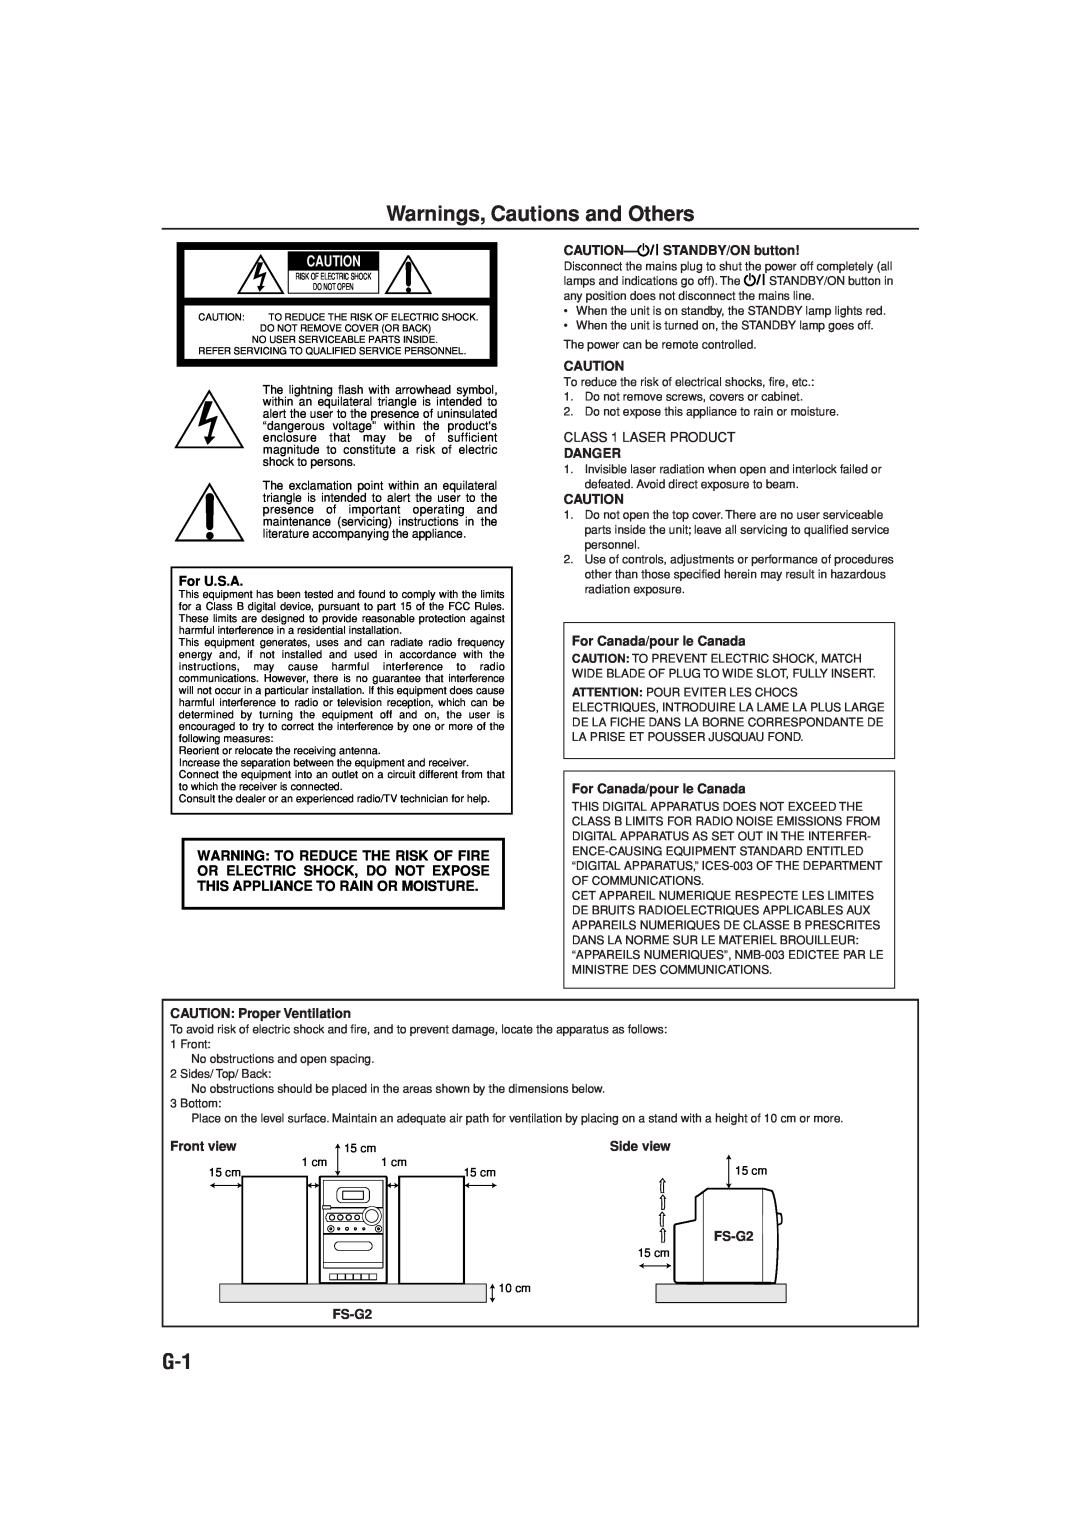 JVC FS-G2 manual Warnings, Cautions and Others, For U.S.A, CAUTION-STANDBY/ON button, Danger, For Canada/pour le Canada 